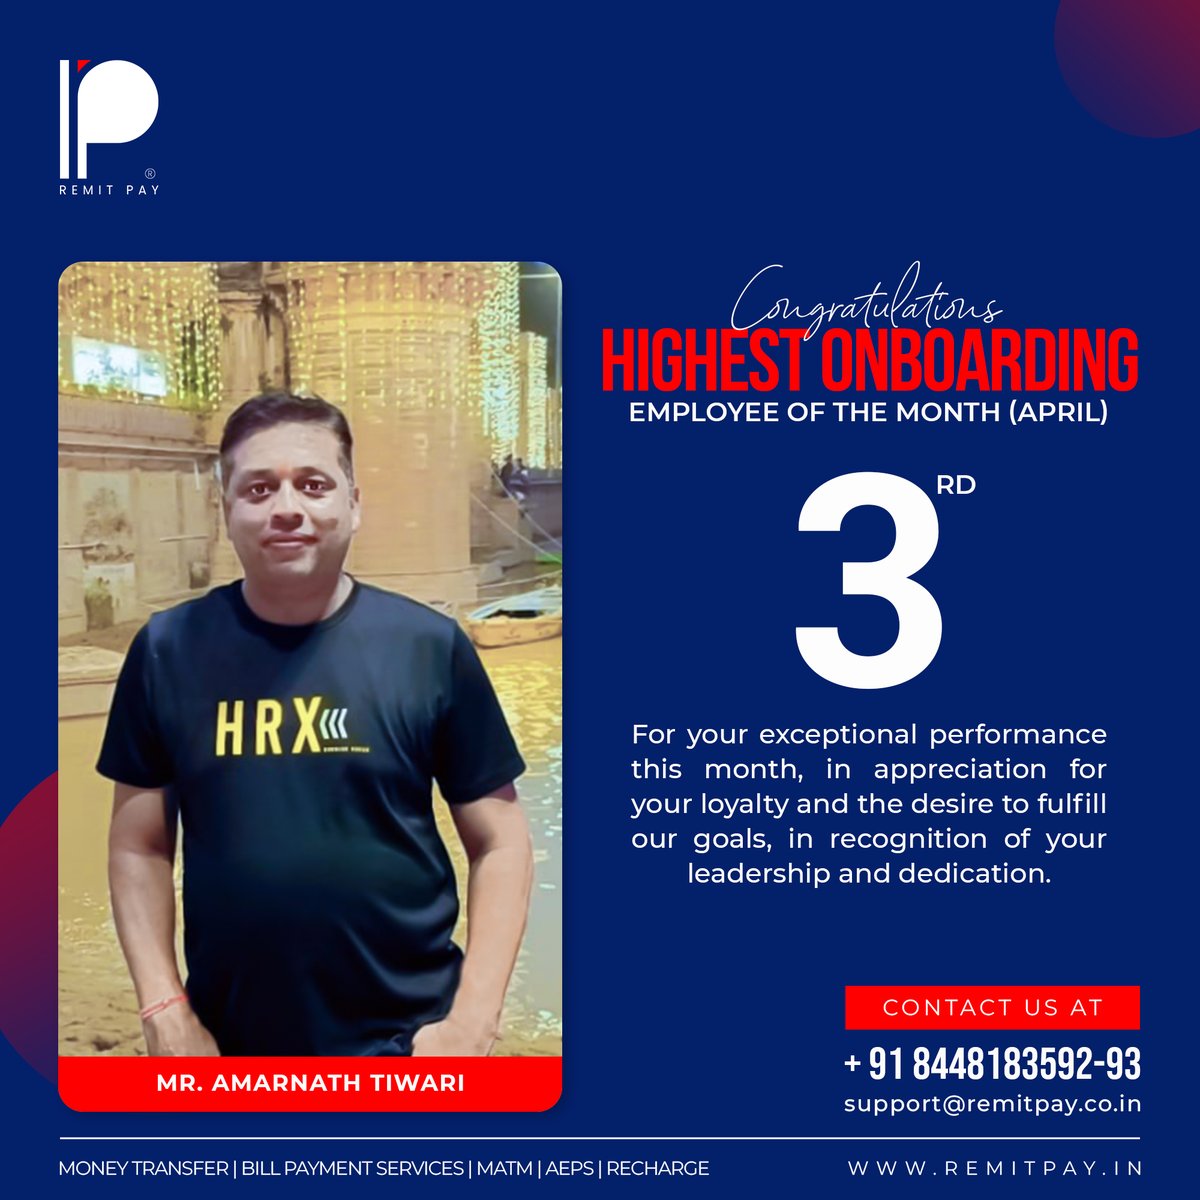 Highest Onboarding_Rank 3: Employee of the month (April)

Congratulations Mr. Amarnath Tiwari!

#financialservice #financialservices #fintech #fintechs #fintechstartup #fintechsolutions #fintechrevolution #employeeofthemonth #employee #employeeofthemonth #employeerecognition